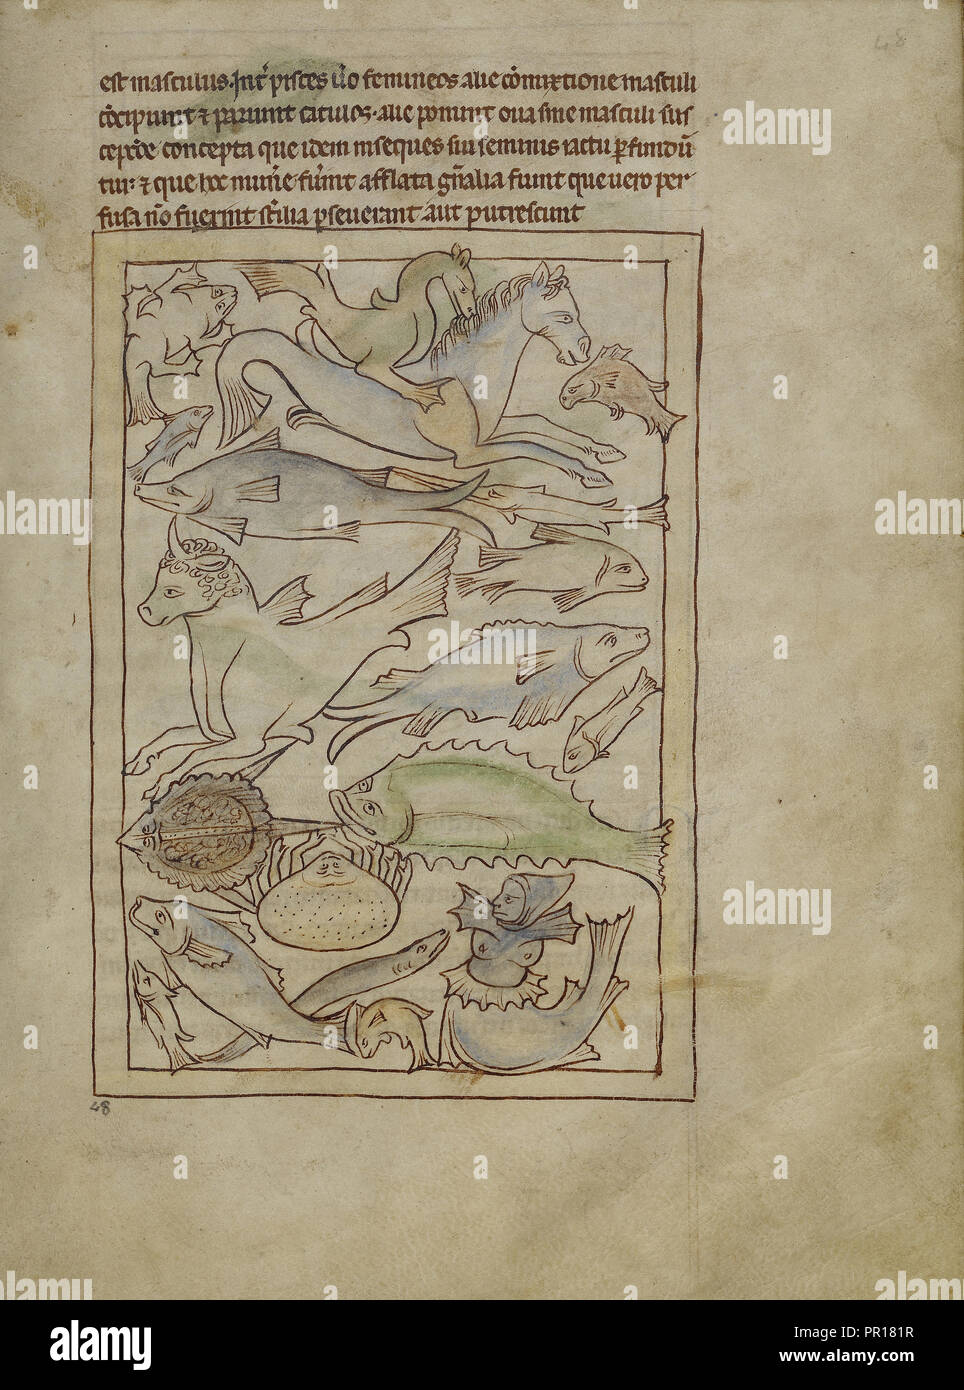 Fish and Sea Monsters; England; about 1250 - 1260; Pen-and-ink drawings tinted with body color and translucent washes Stock Photo